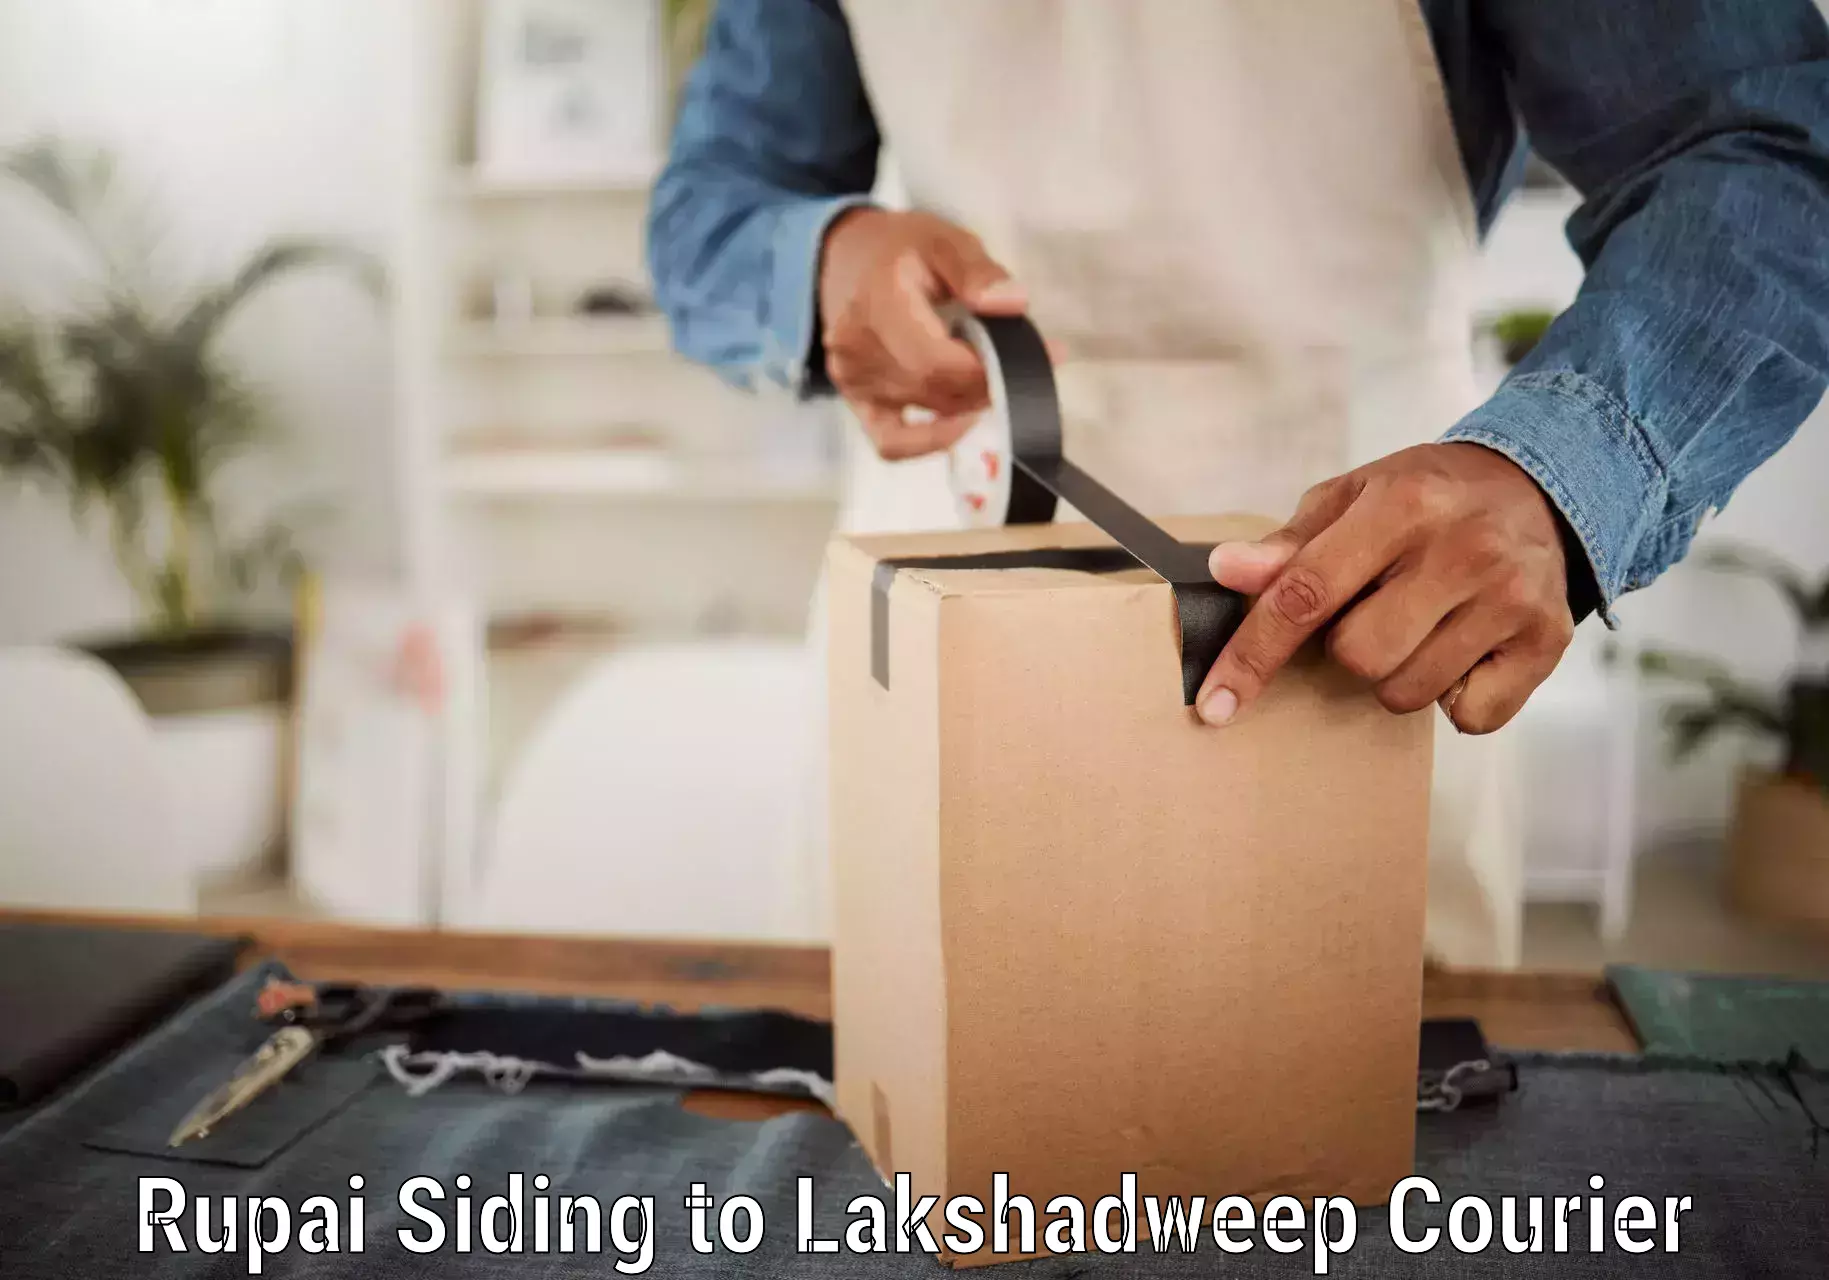 Modern courier technology Rupai Siding to Lakshadweep